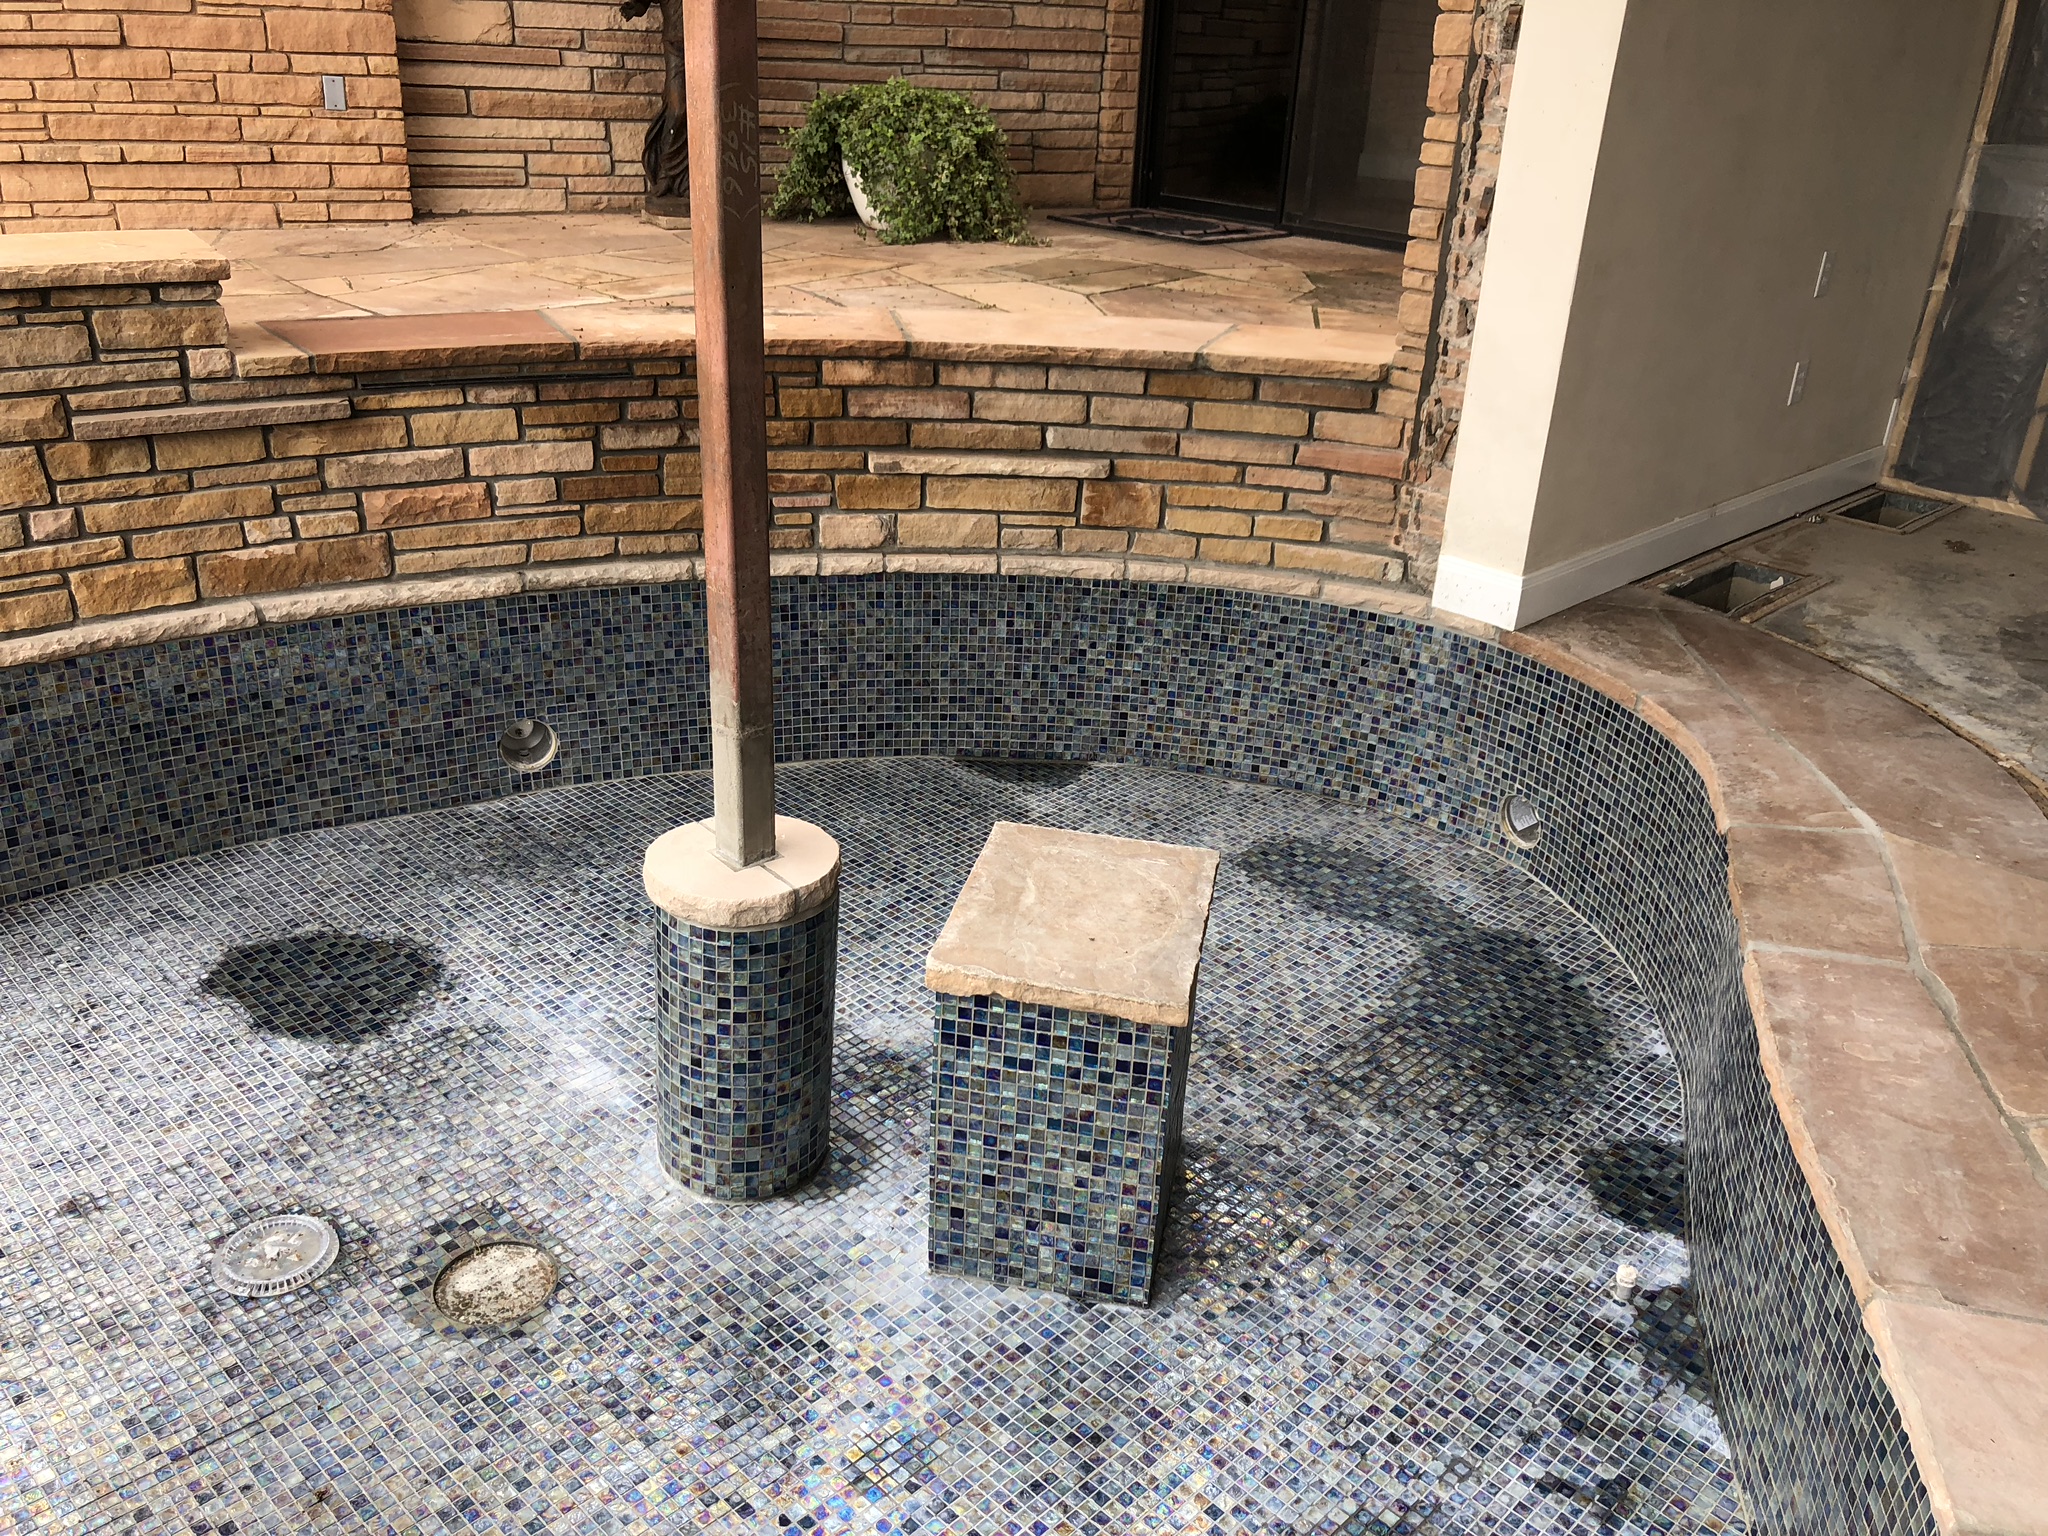 Our newly installed 1" Mosaic Glass Tile (once cleaned up) will create a gorgeous night setting. Combined with some illuminated LED nicheless pool lights, these water features will be able to take on any color you desire! Controlled by the palm of your hand, this will surely be a sight to see!